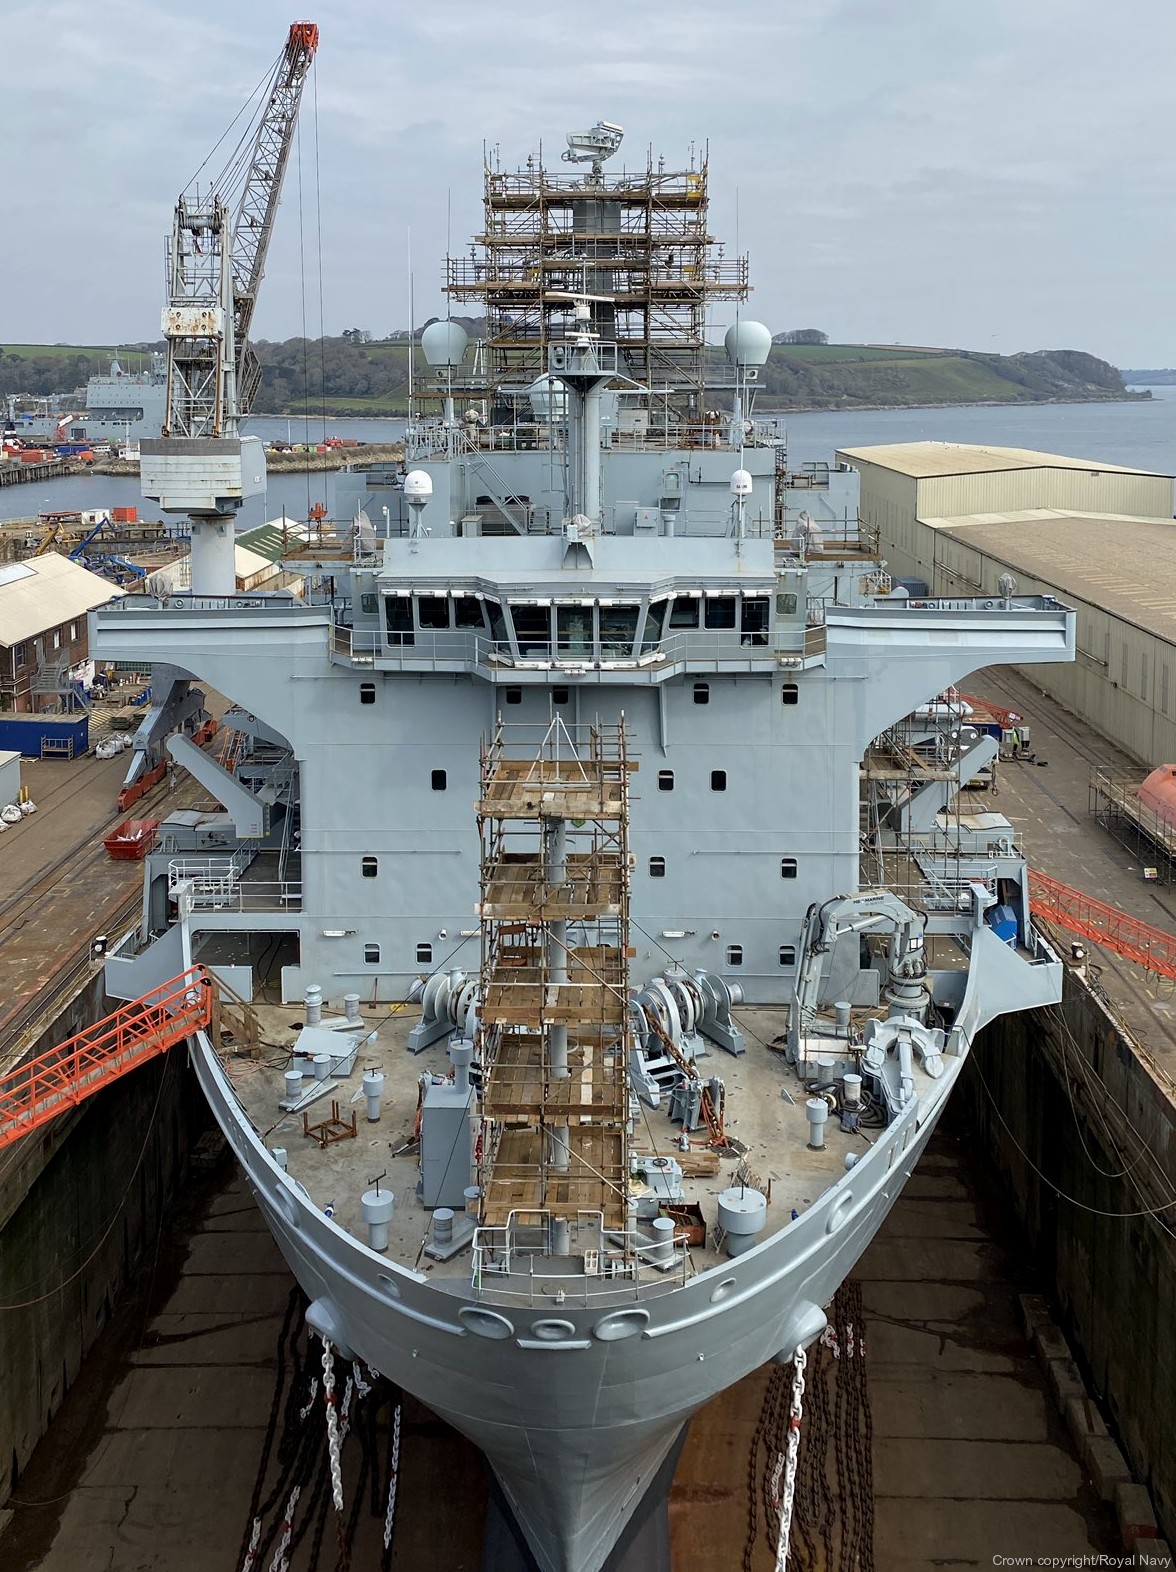 a 135 rfa argus casualty receiving ship support royal fleet auxilary navy 36 dry dock